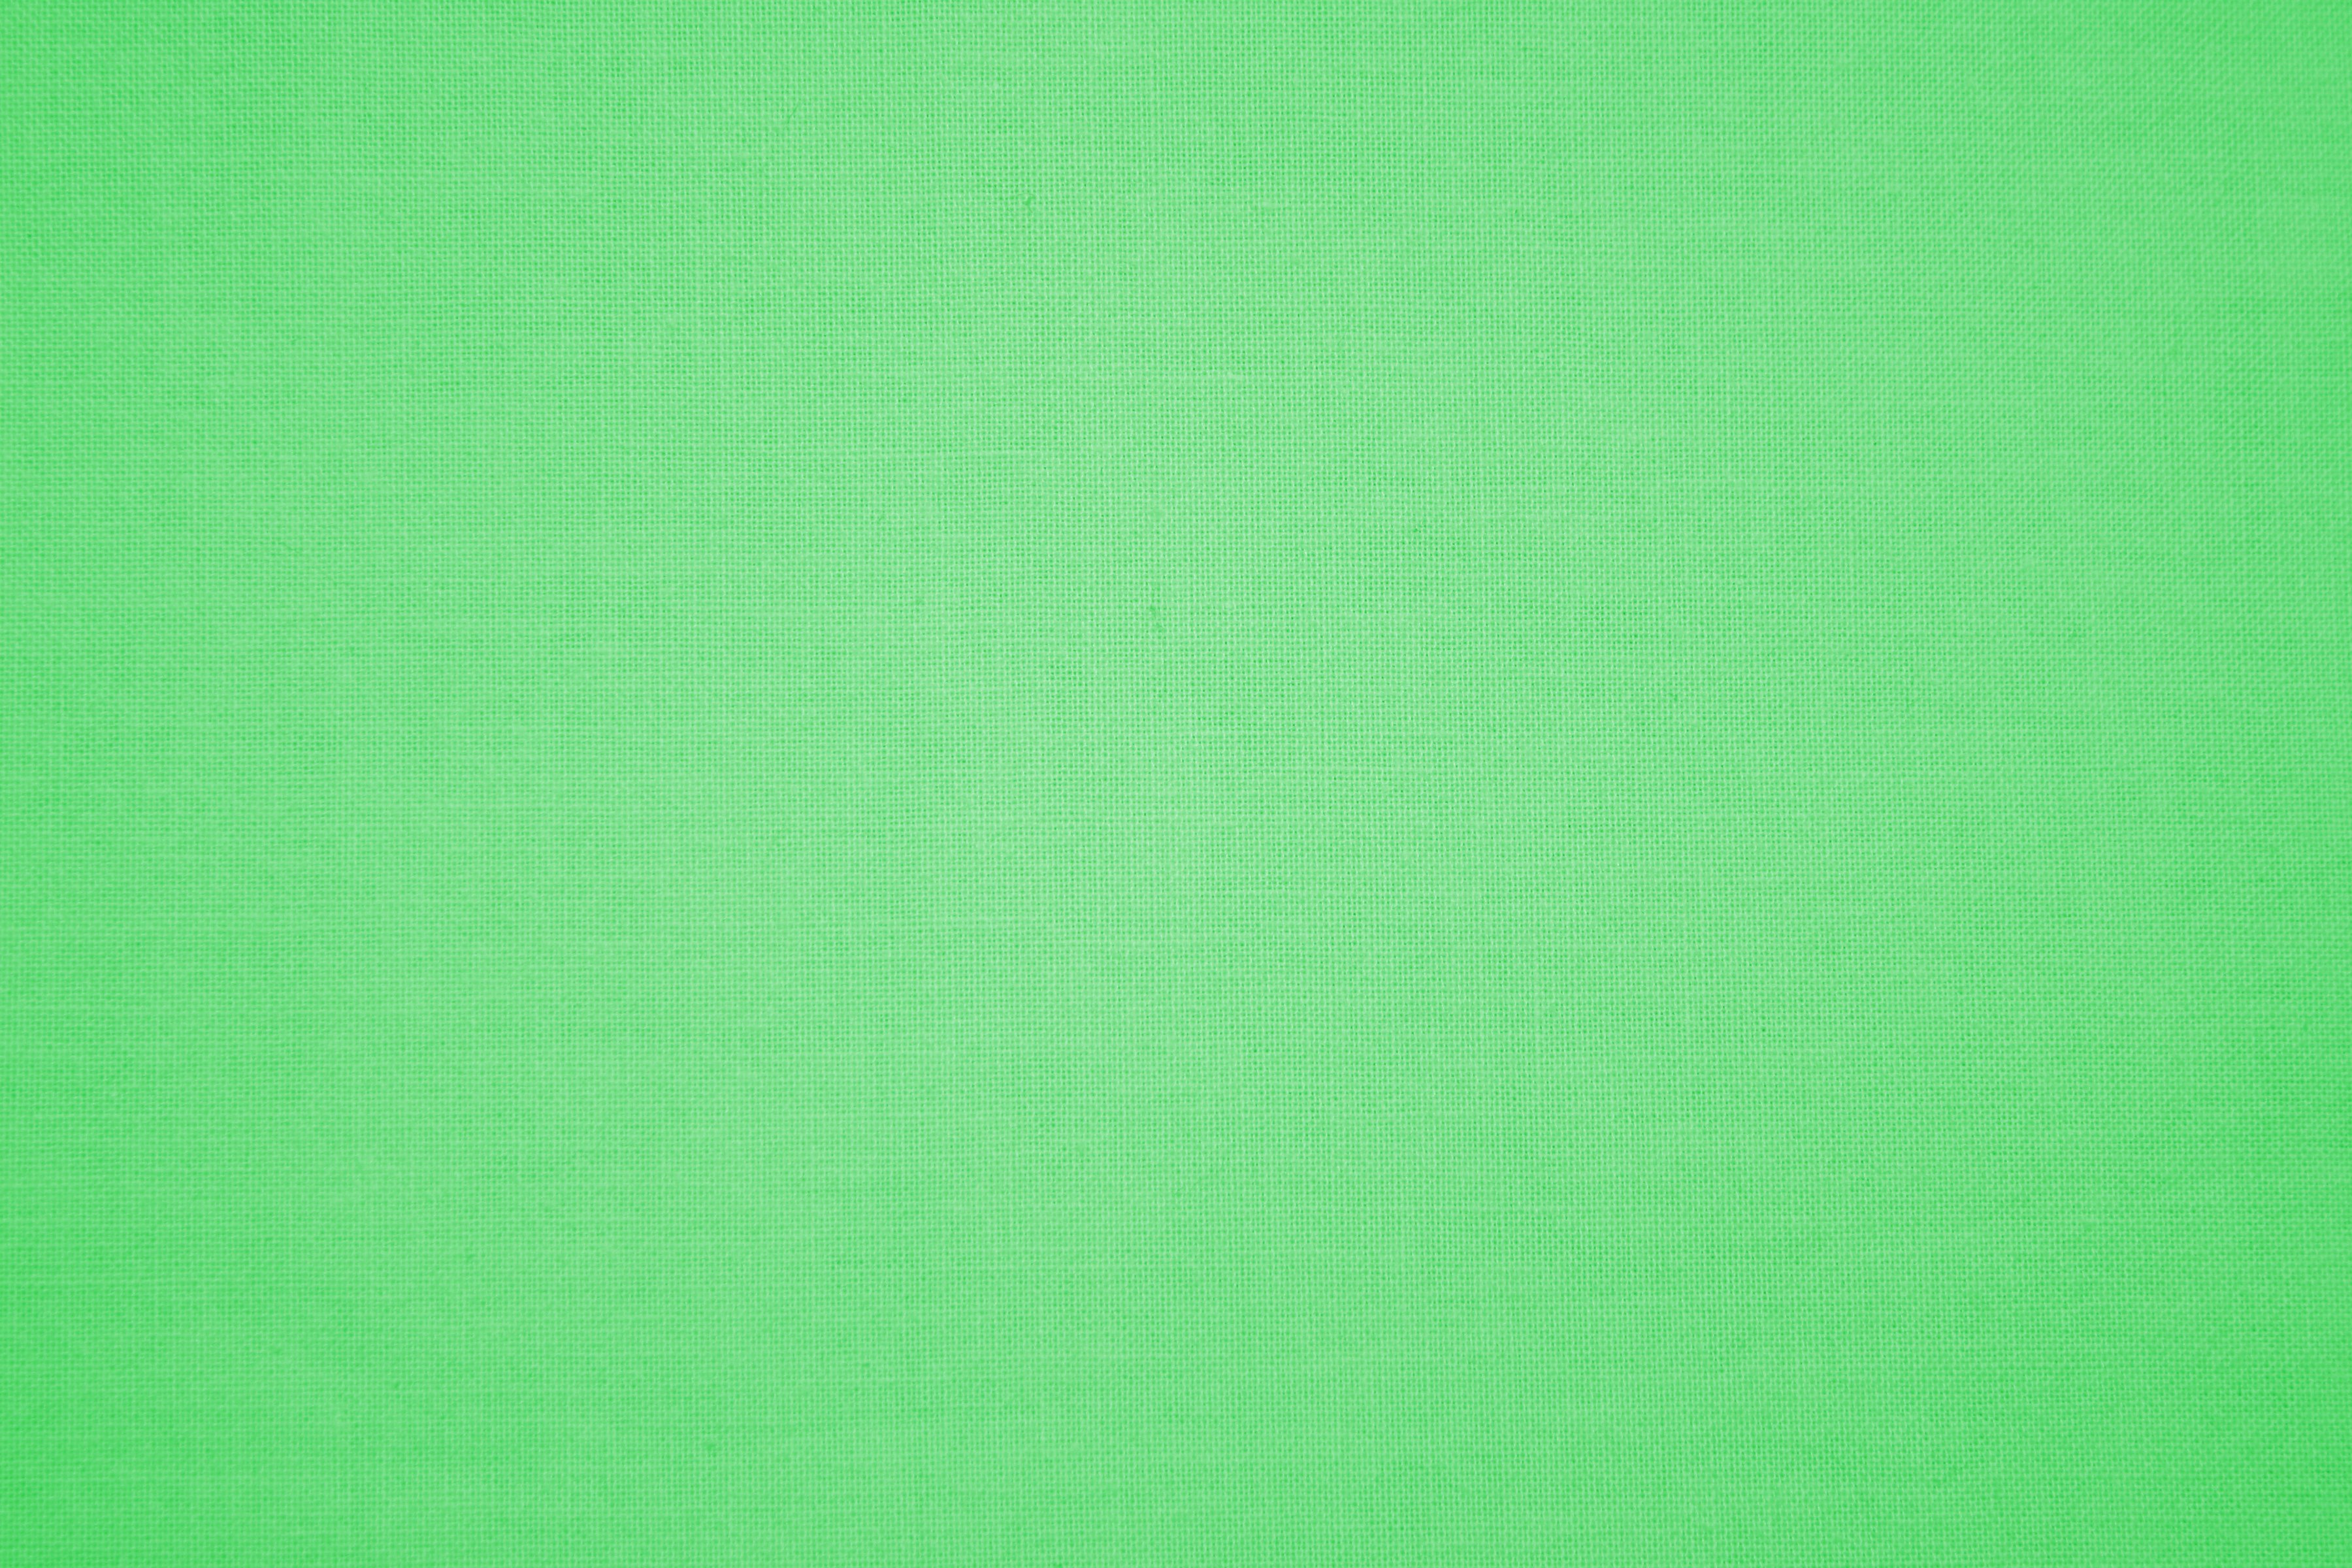 Light Green Canvas Fabric Texture Picture, Free Photograph